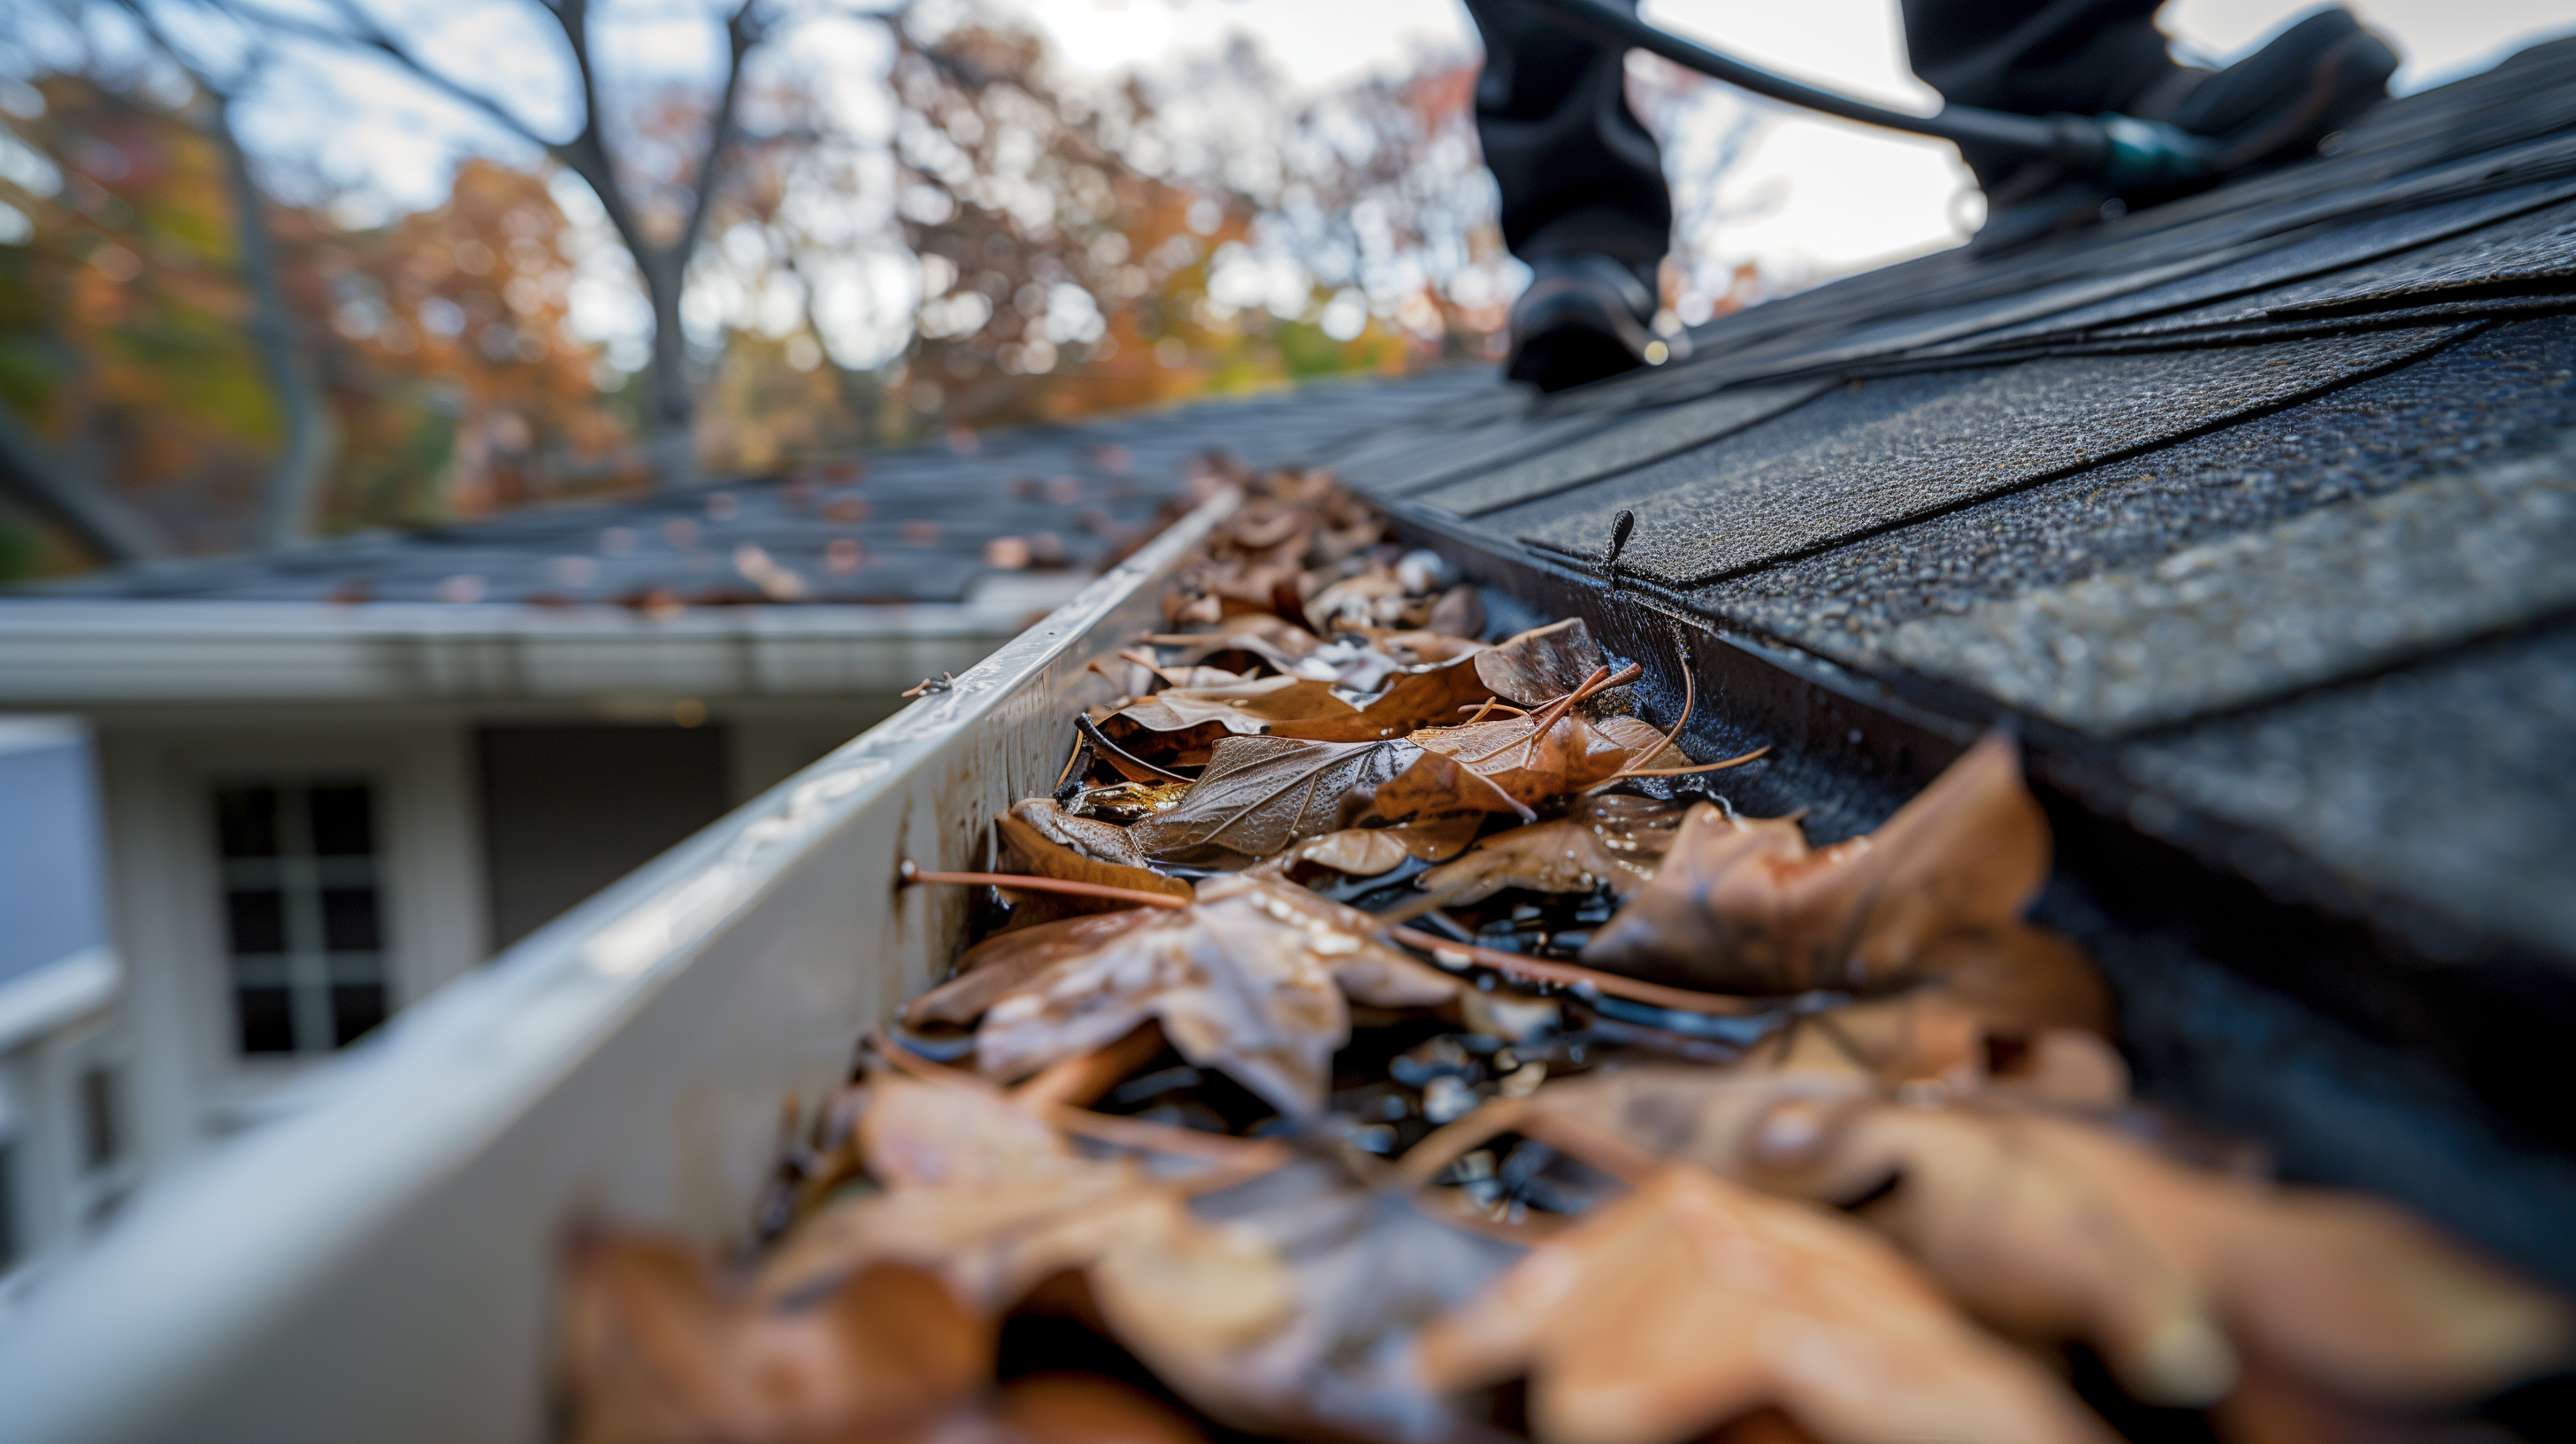 The gutter has leaves on a nice modern gable shingle roof that needs to be cleaned, and a worker is on top of the roof pressure washing the gutter.